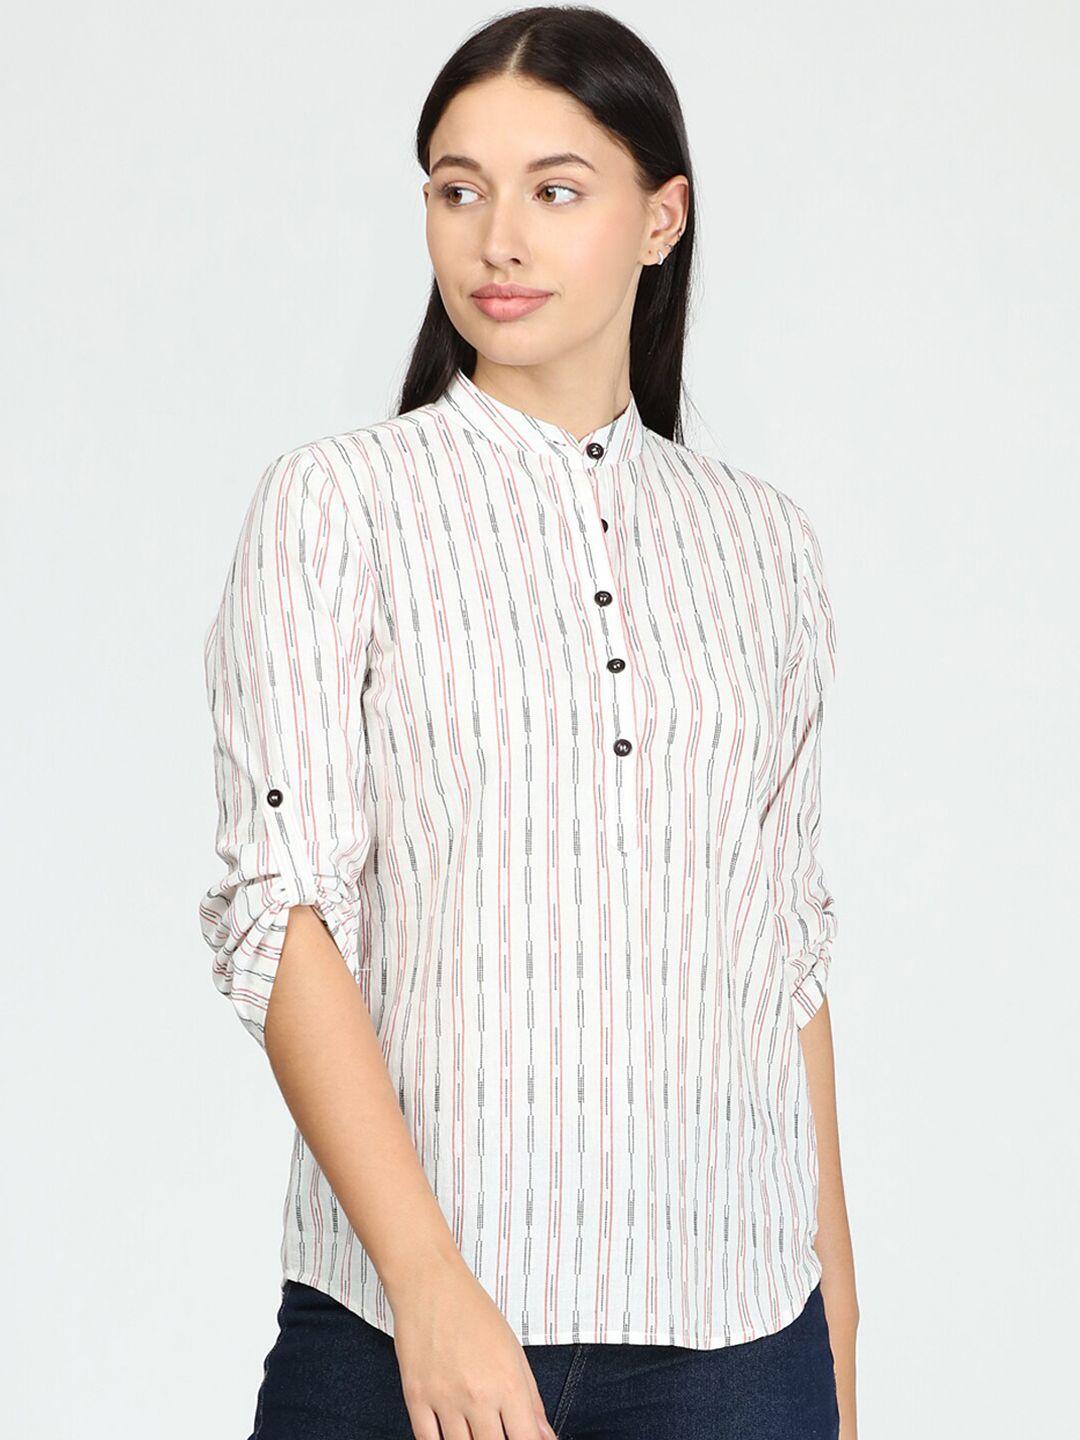 idk-white-&-red-striped-cotton-mandarin-collar-roll-up-sleeves-shirt-style-top